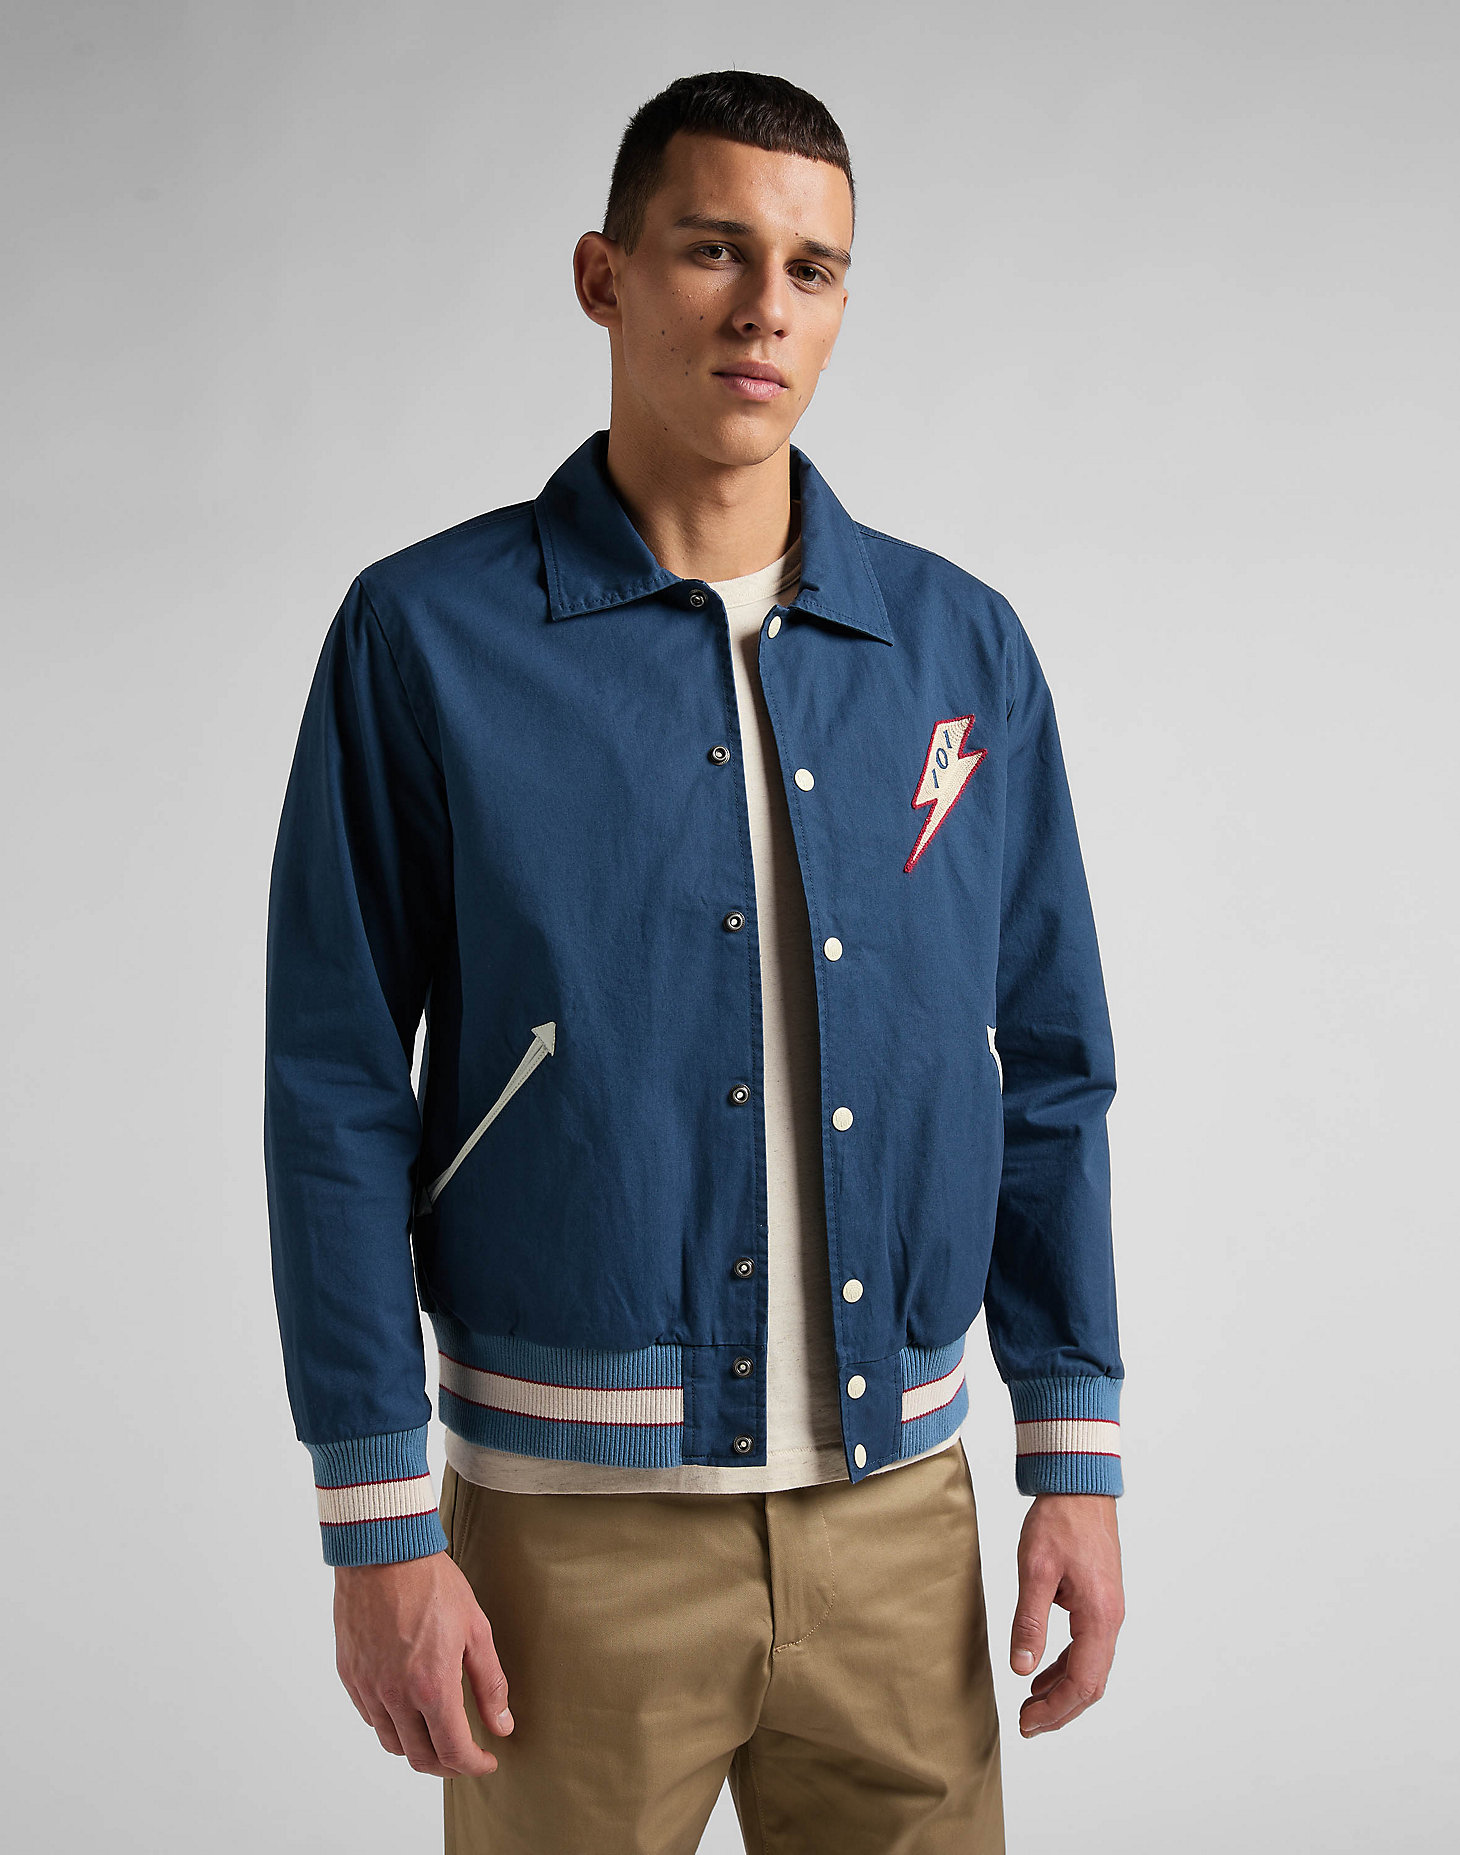 101 Bomber Jacket in Ensign Blue alternative view 3